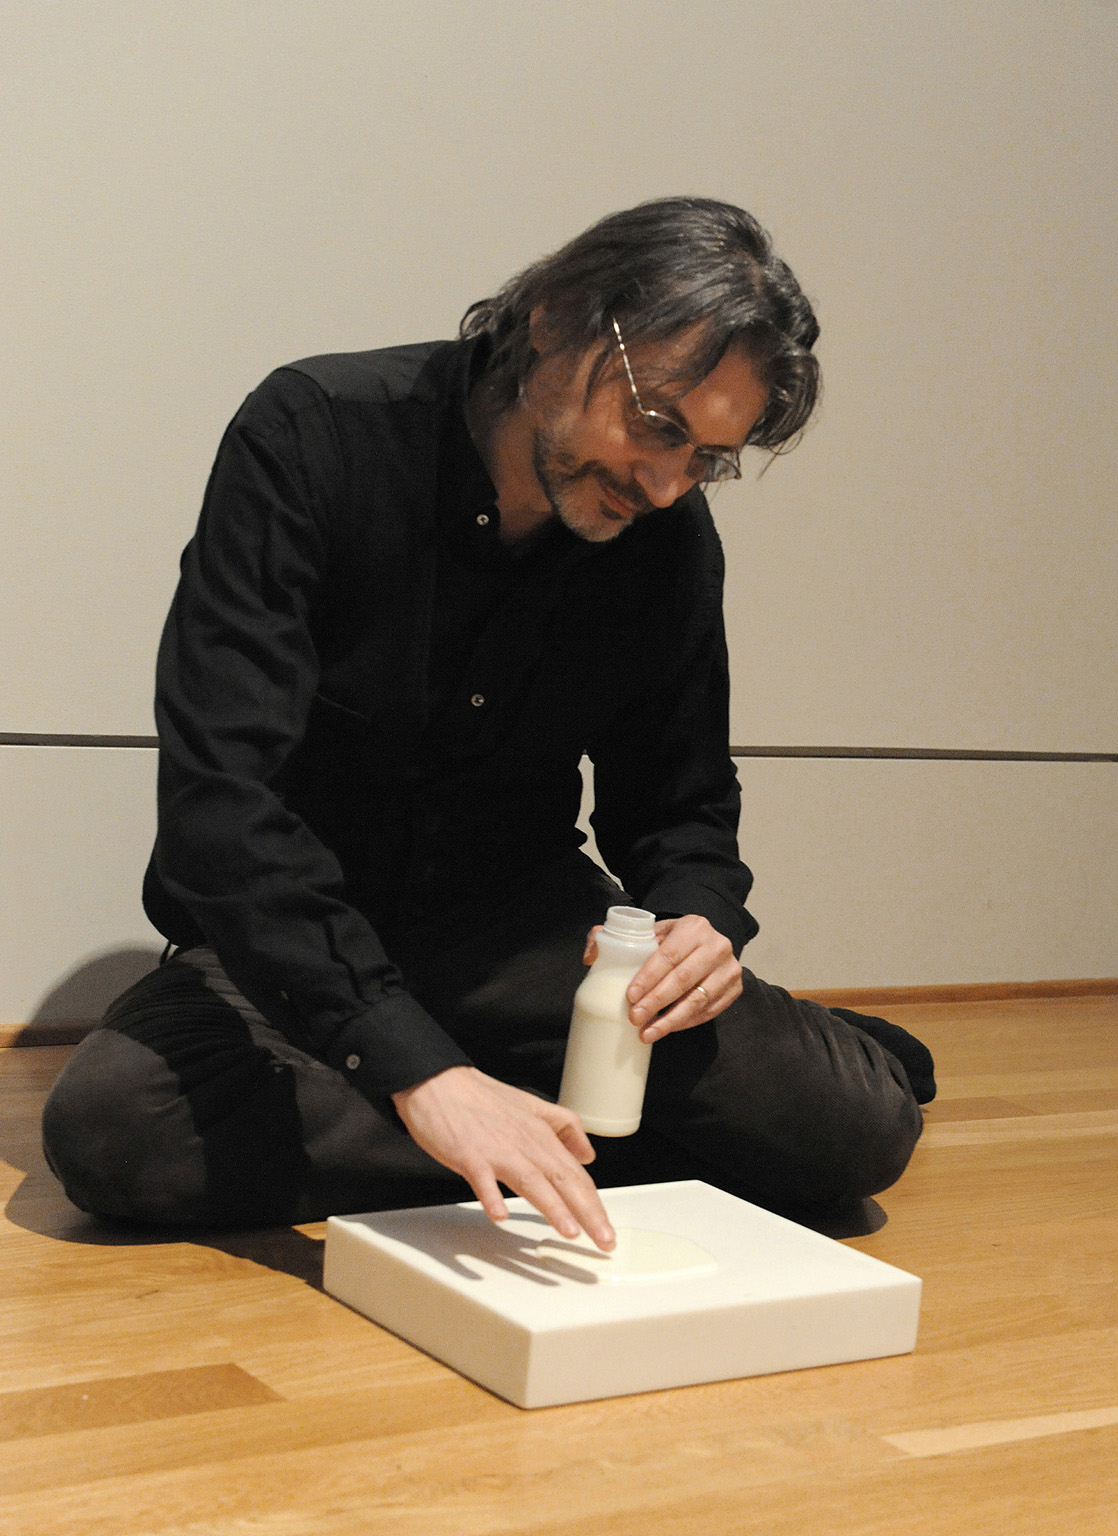 Pouring a milkstone by Wolfgang Laib